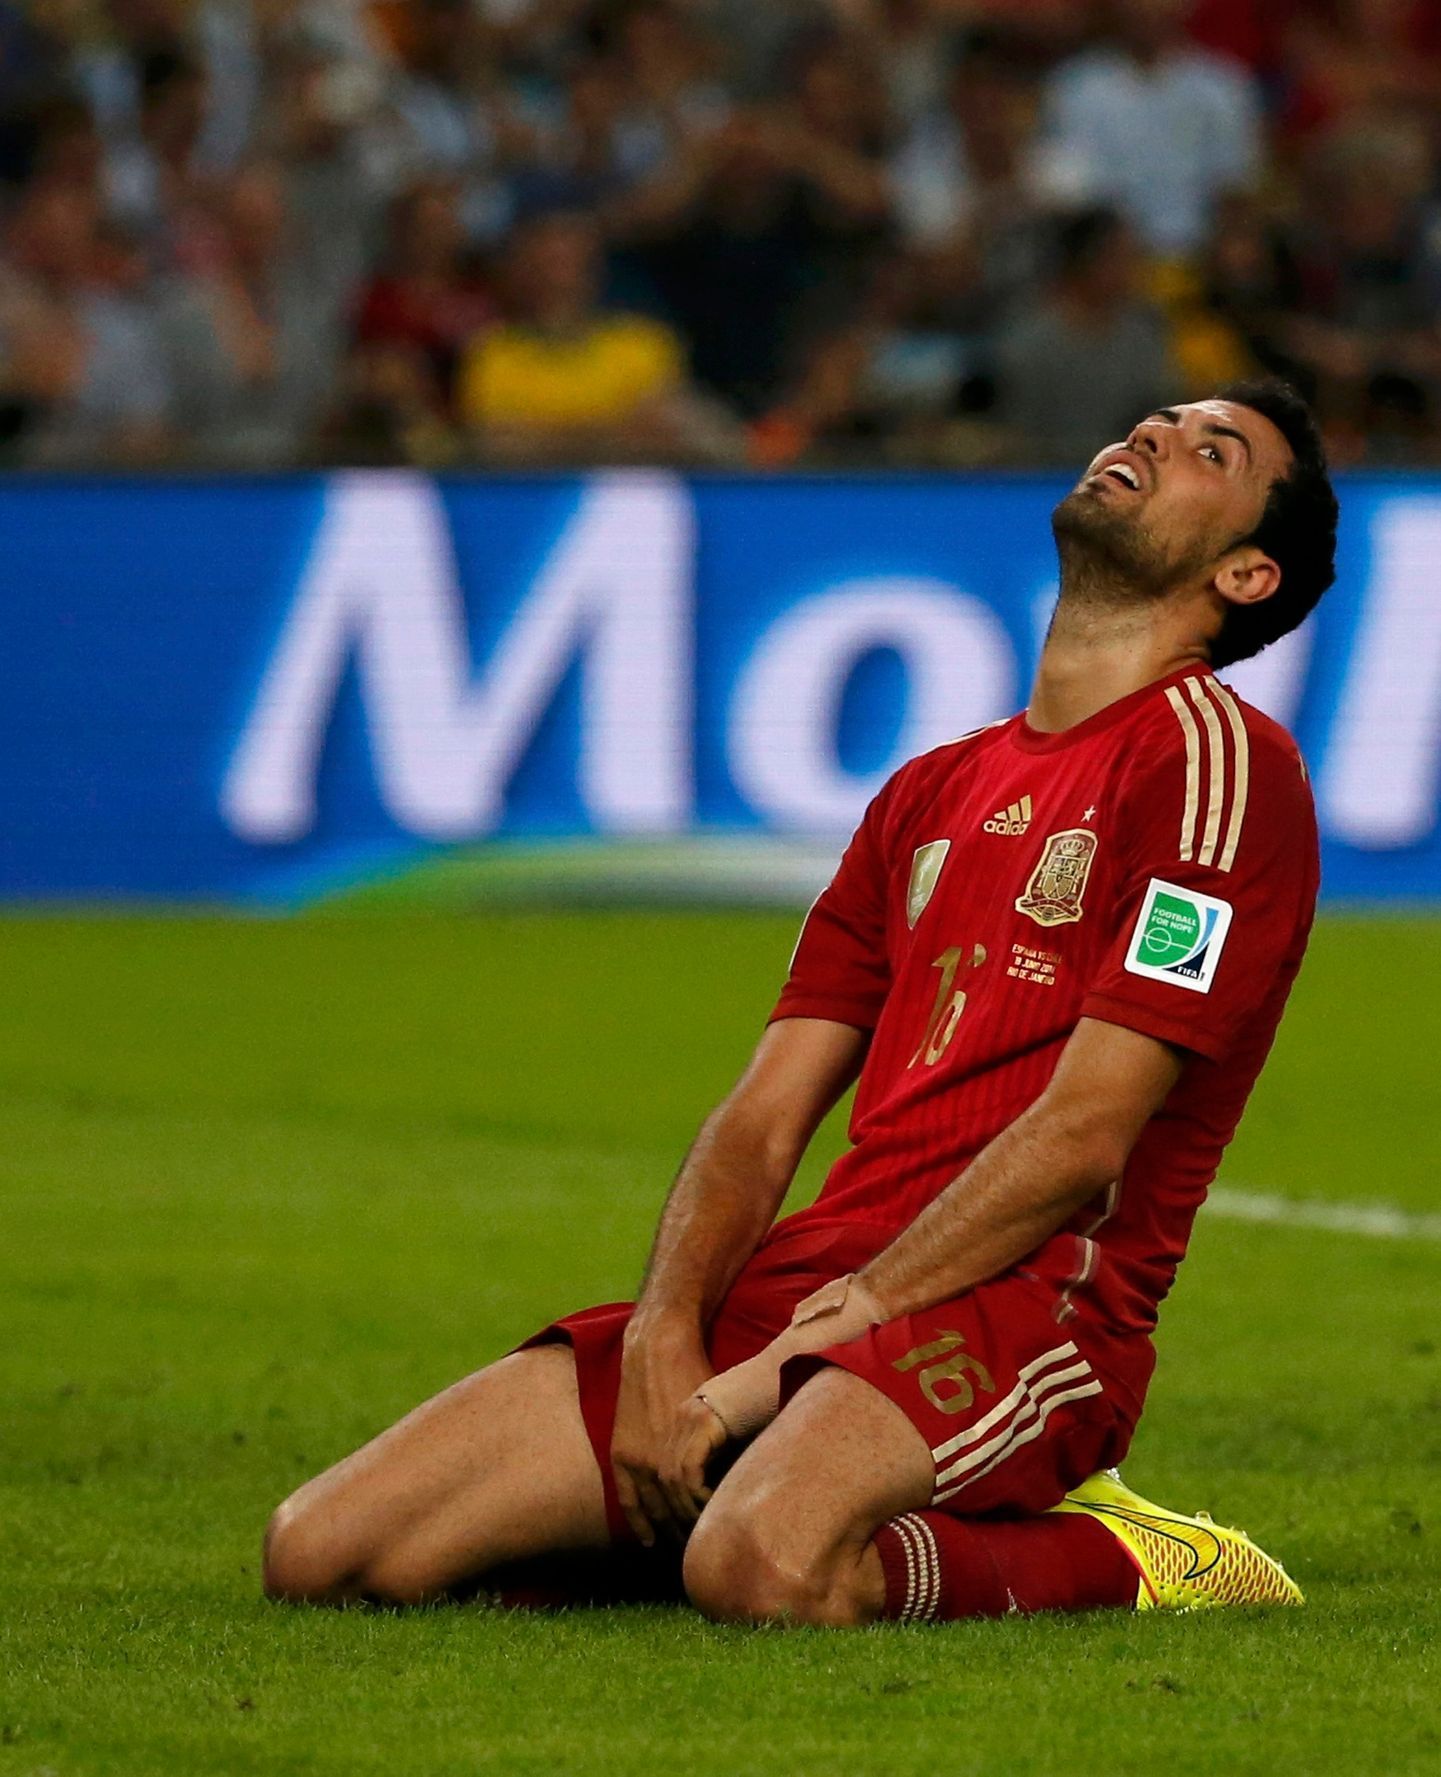 Spain's Sergio Busquets reacts after missing a chance to score a goal during their 2014 World Cup Group B soccer match against Chile at the Maracana stadium in Rio de Janeiro